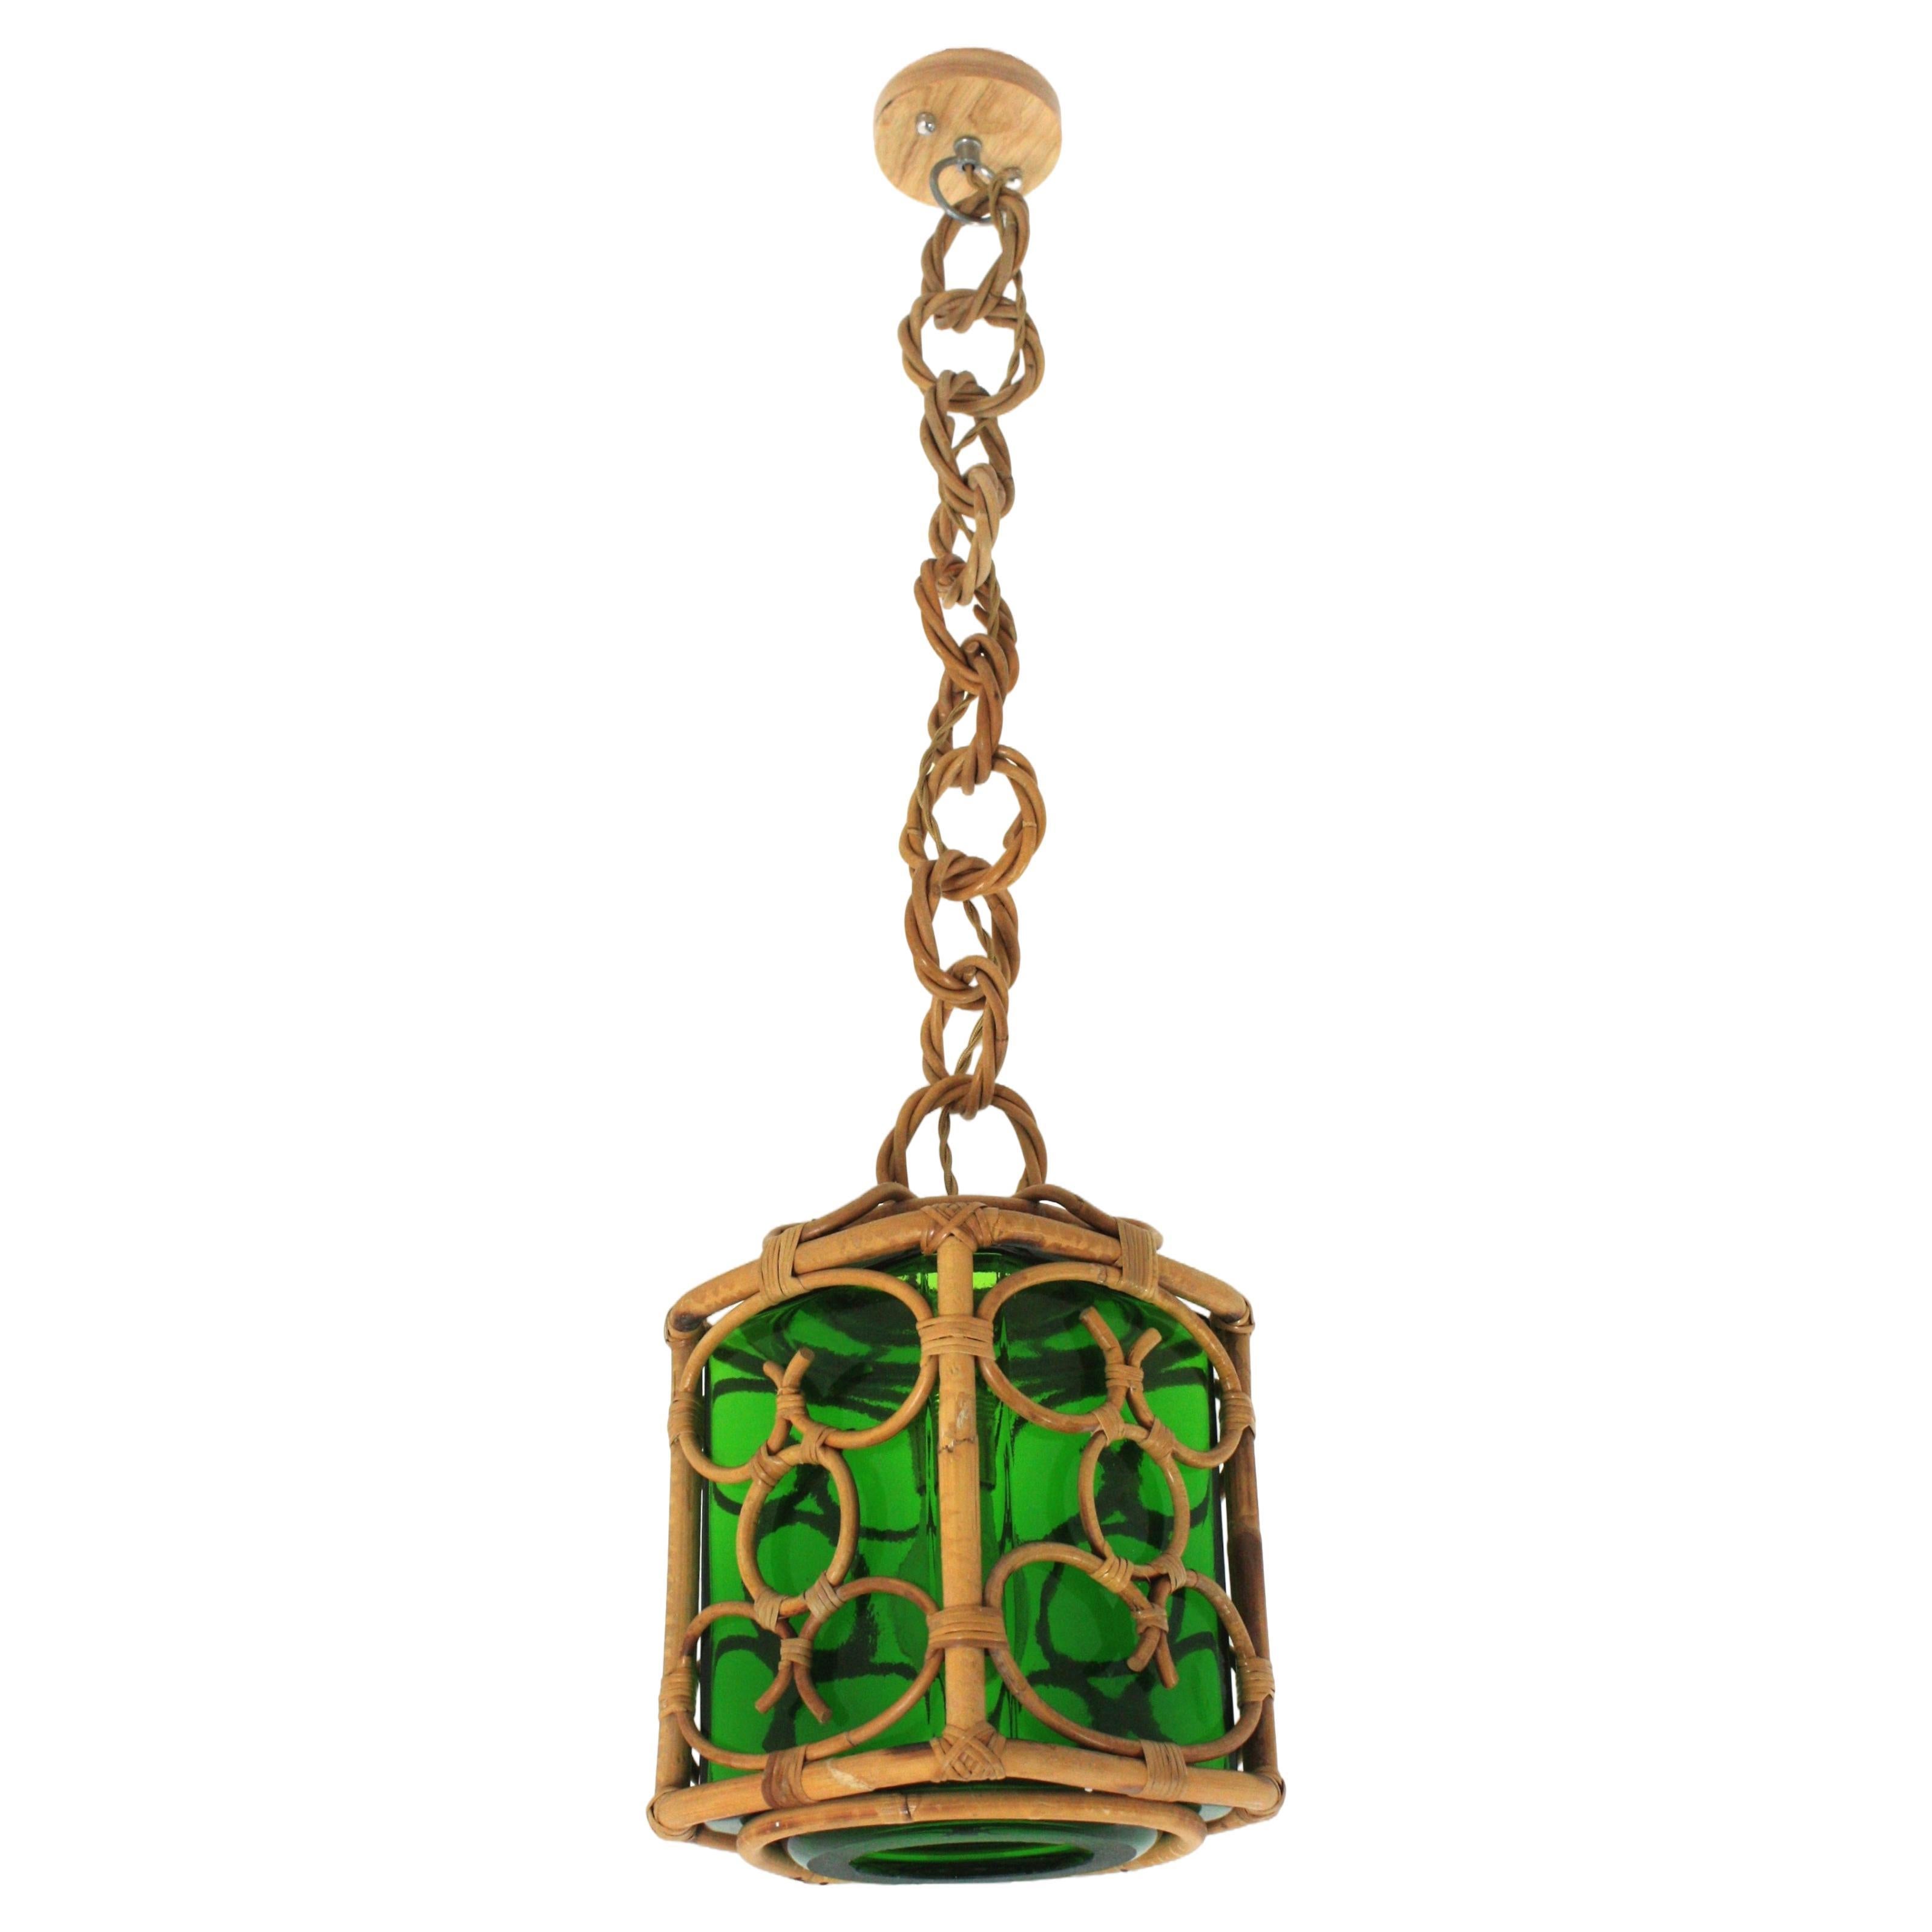 Square pendant light with glass lampshade, rattan, bamboo, France, 1960s.
Mid-Century Modern bamboo and rattan oriental inspired lantern with green blown glass lampshade.
This handcrafted ceiling lamp features a square shaped suspension with